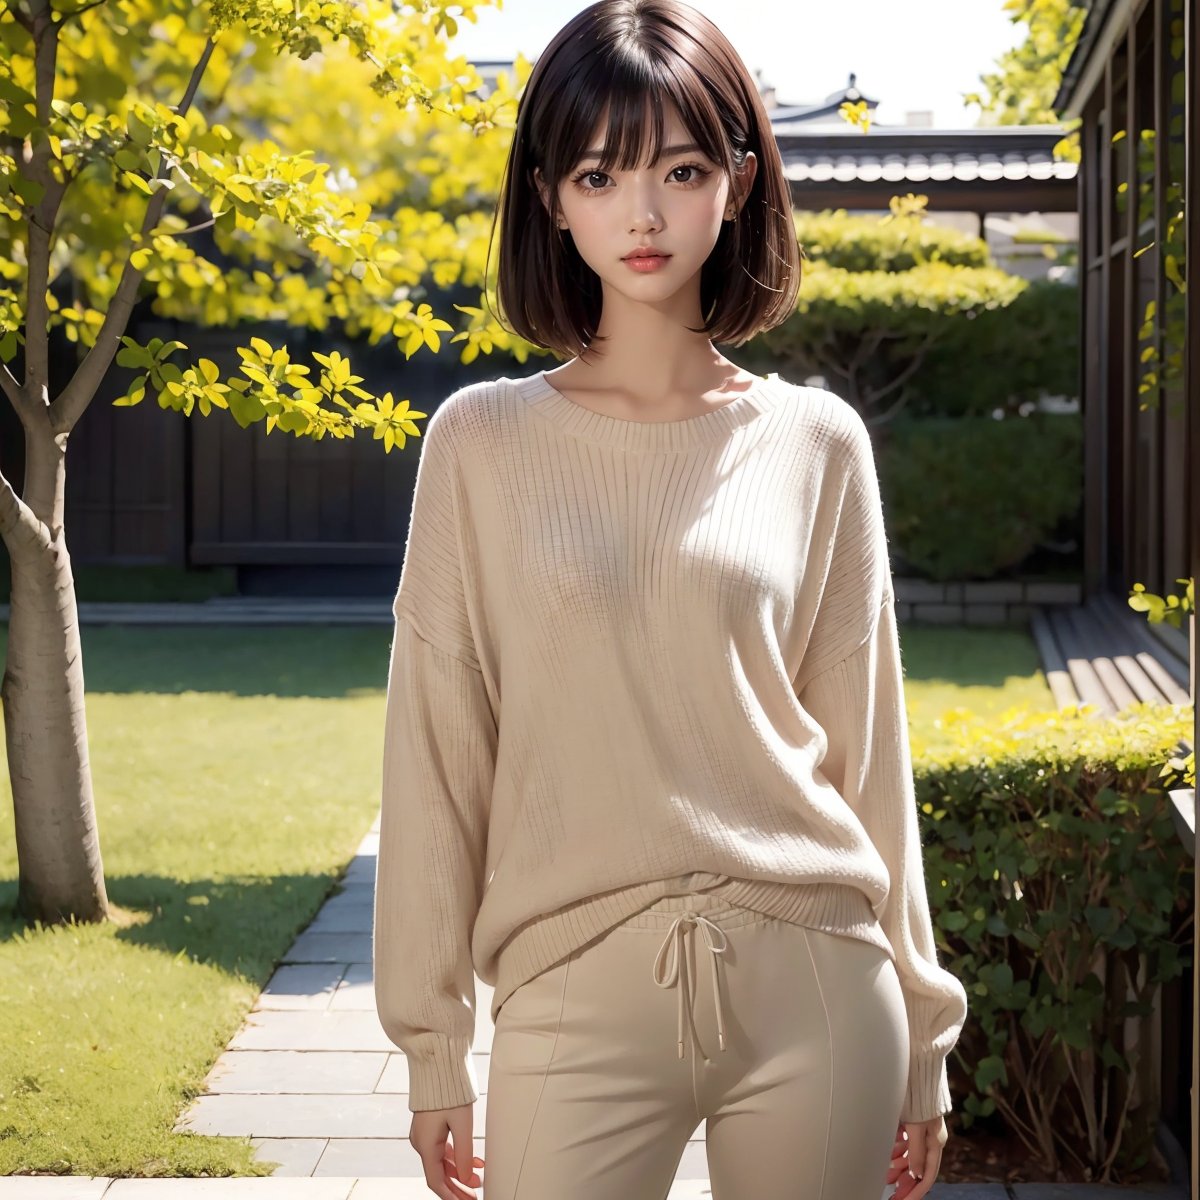 This captivating and visually stunning fractal art depicts a woman's entire body. The official art gives her a strong aesthetic appeal. 4K high resolution rendering. 19 year old Japanese female. Black, straight, short hair with bangs. Black eyes, short eyelashes, small breasts. Standing posture.
Park. White sweater, light peach shirt, light brown long pants.
Full shot.
1 girl. JAPANESE GIRL, akkoj,nanase_nishino